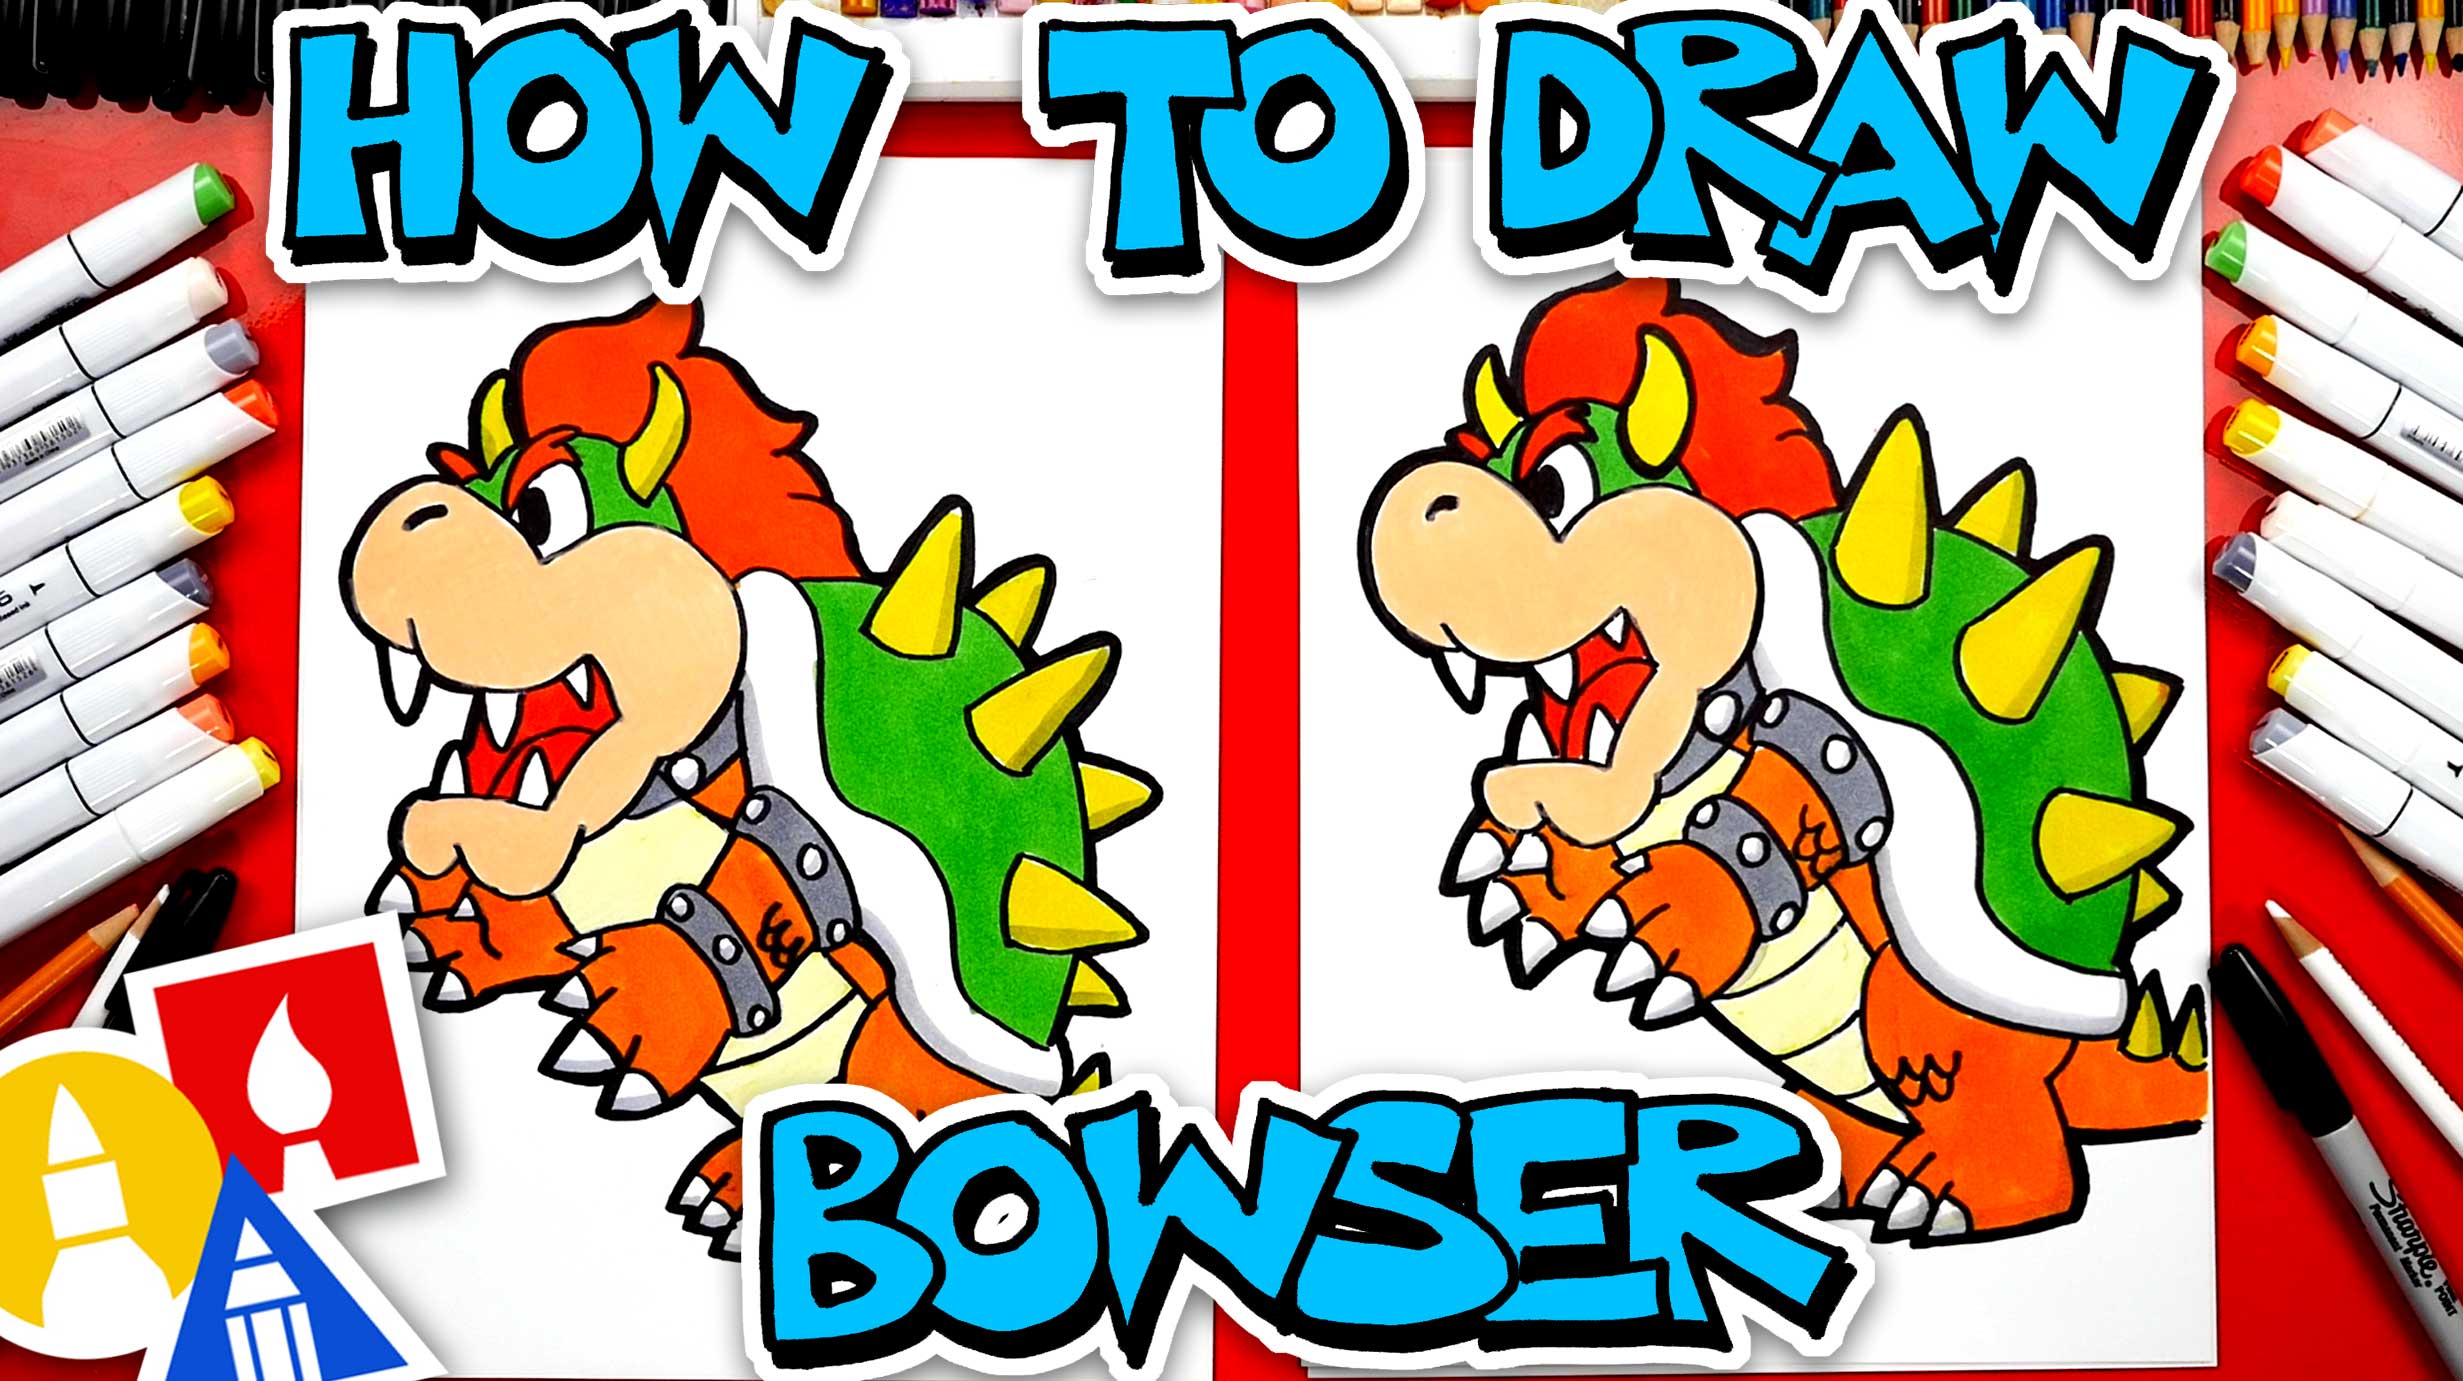 How To Draw Bowser - Art For Kids Hub